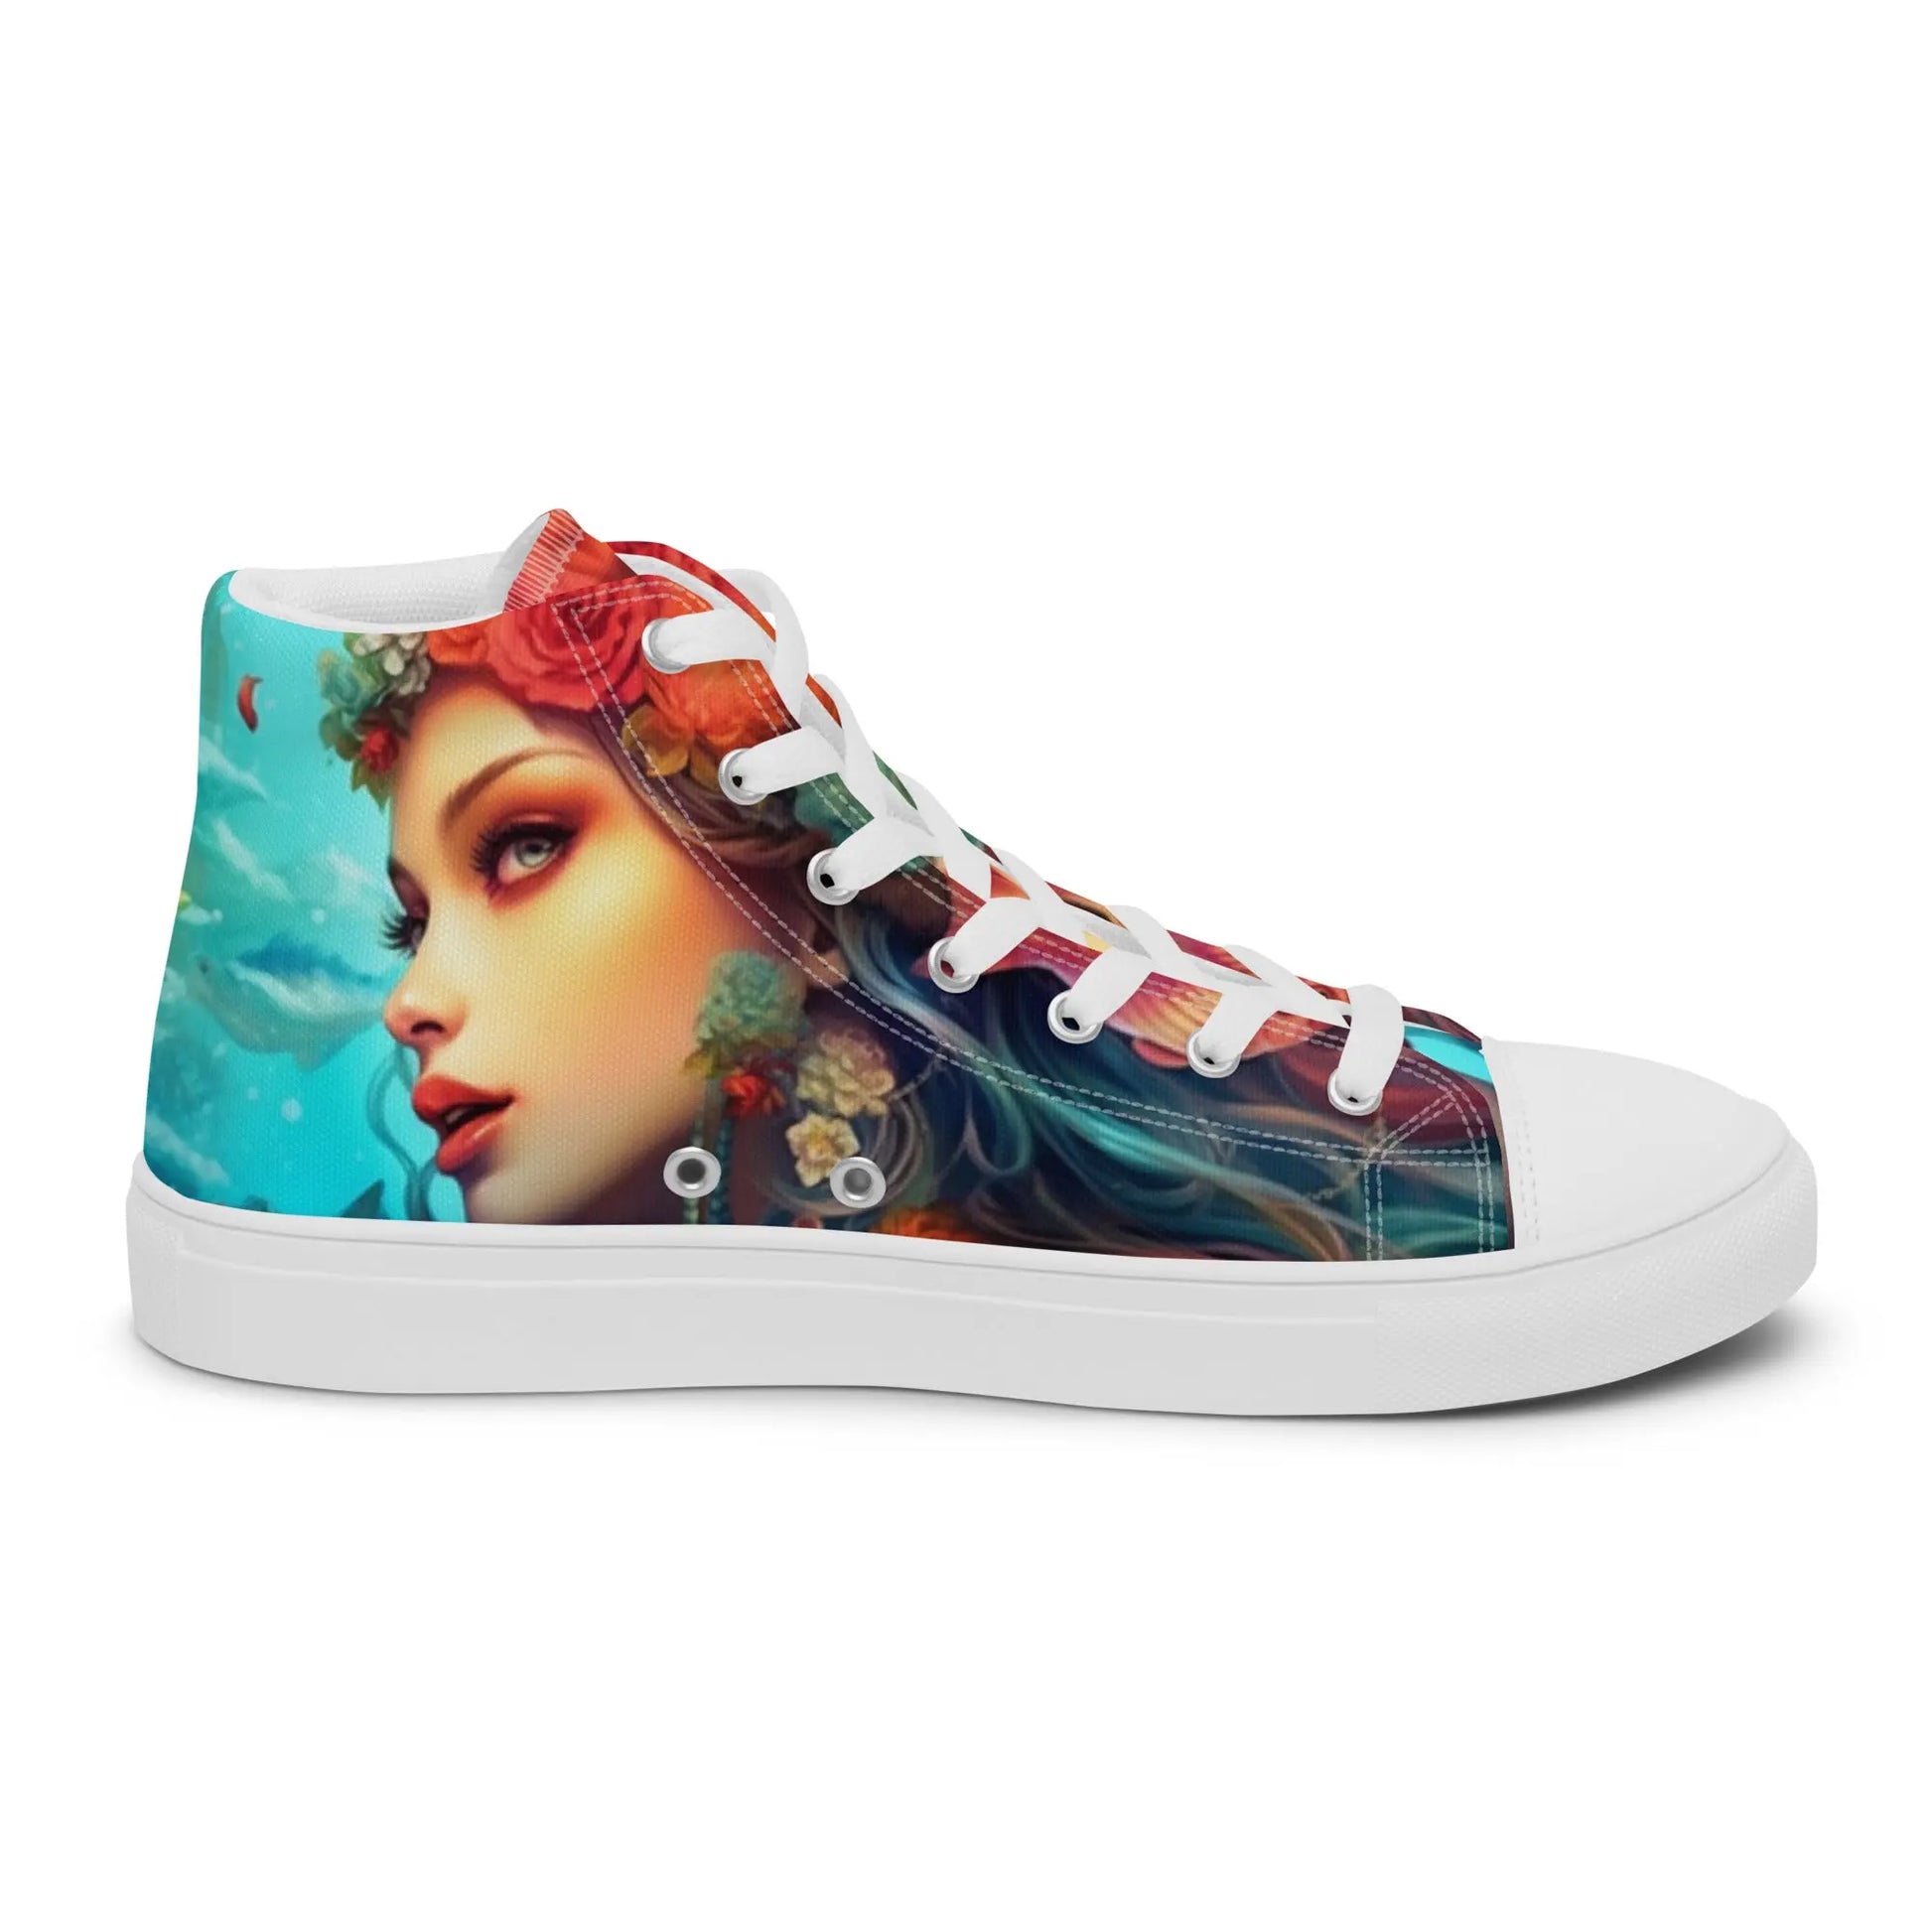 MarineGlow High Top Sneakers: AI-Engineered, Unisex, Dive into Colorful Elegance with Durable, Comfortable, SeaLife, Art-Inspired Footwear Kinetic Footwear